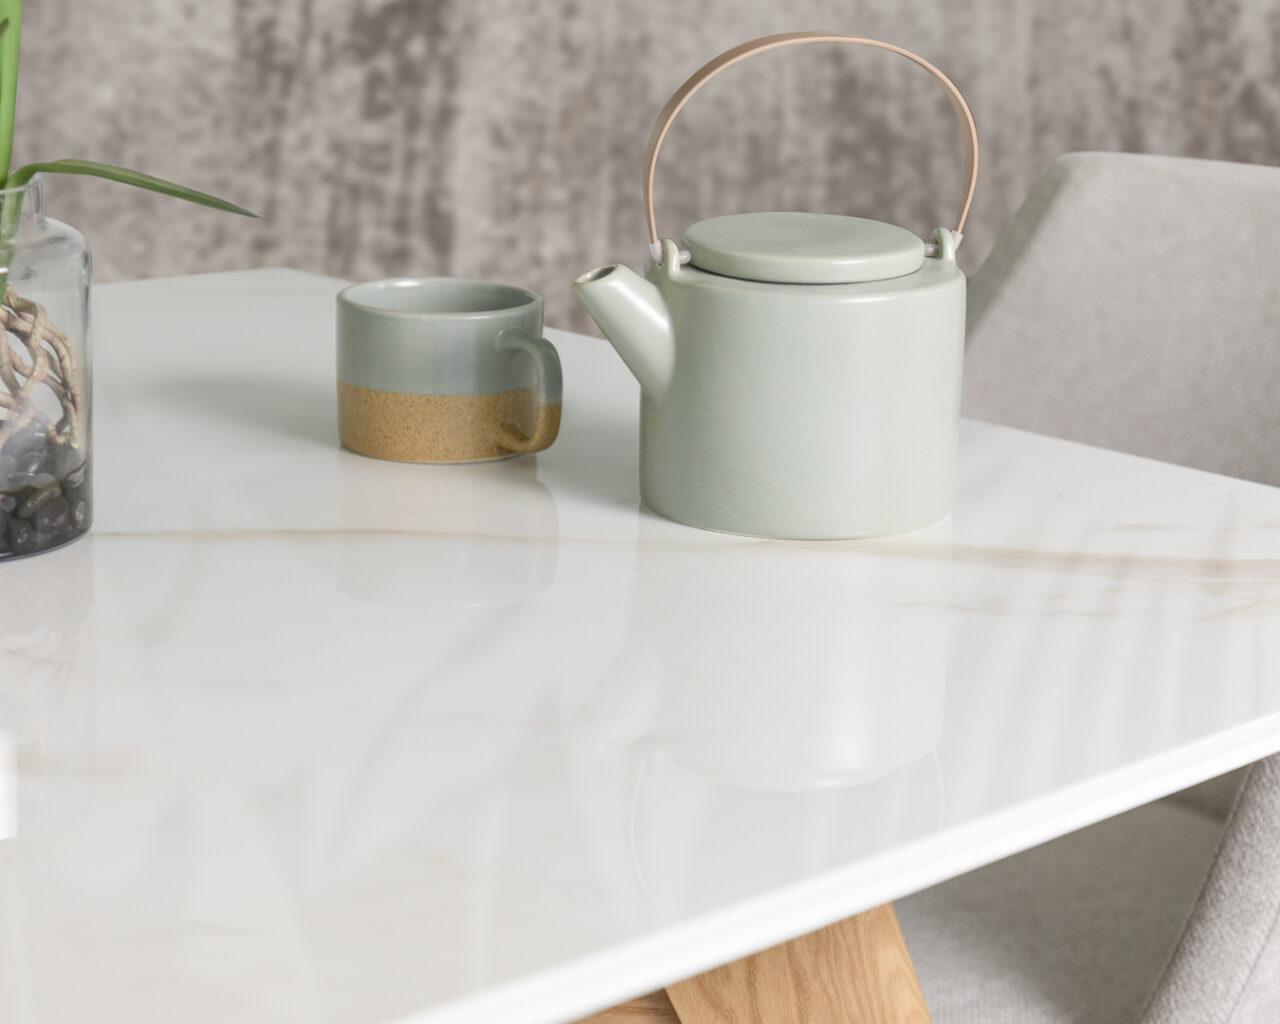 a close up shot of a white marbled coffee table that on top of it has mint coloured kettle and a mug